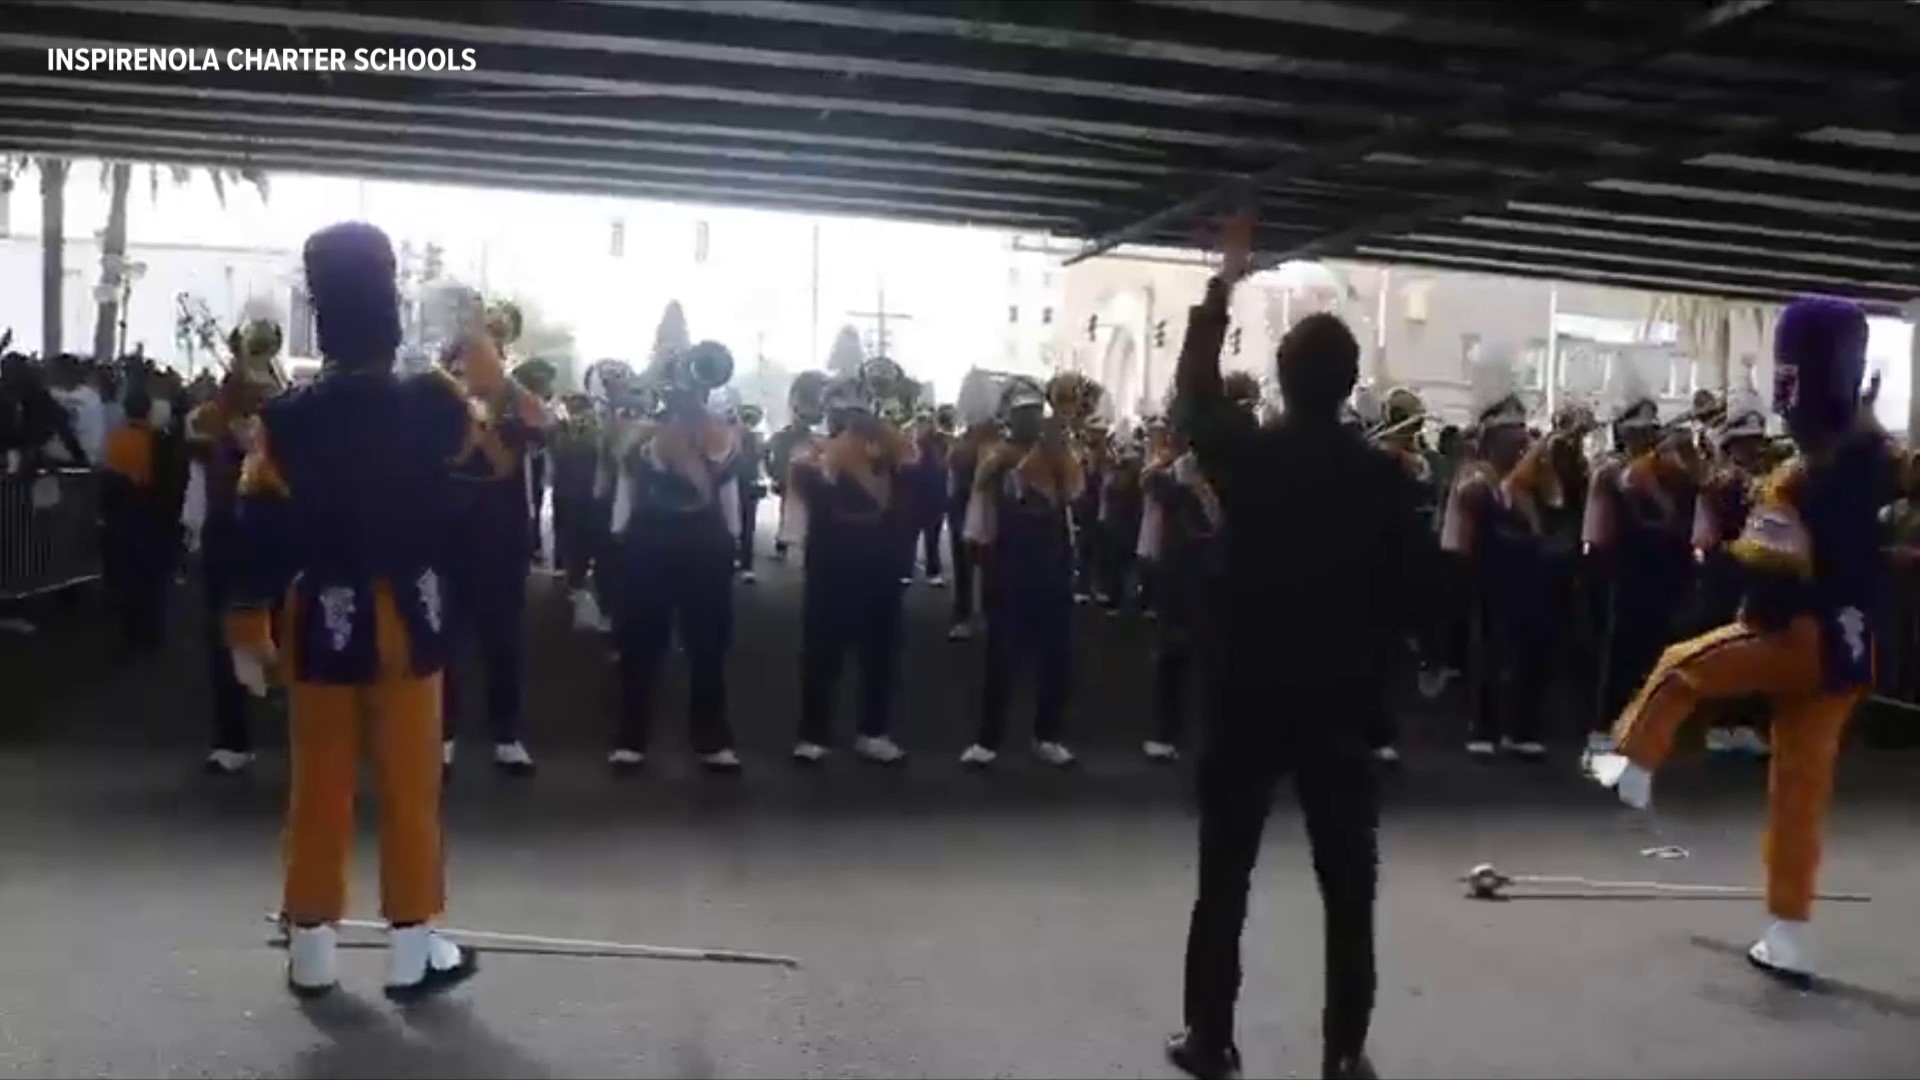 When the parade stops and you are under a bridge, turn it into a party. Edna Karr High School turned it to another level.